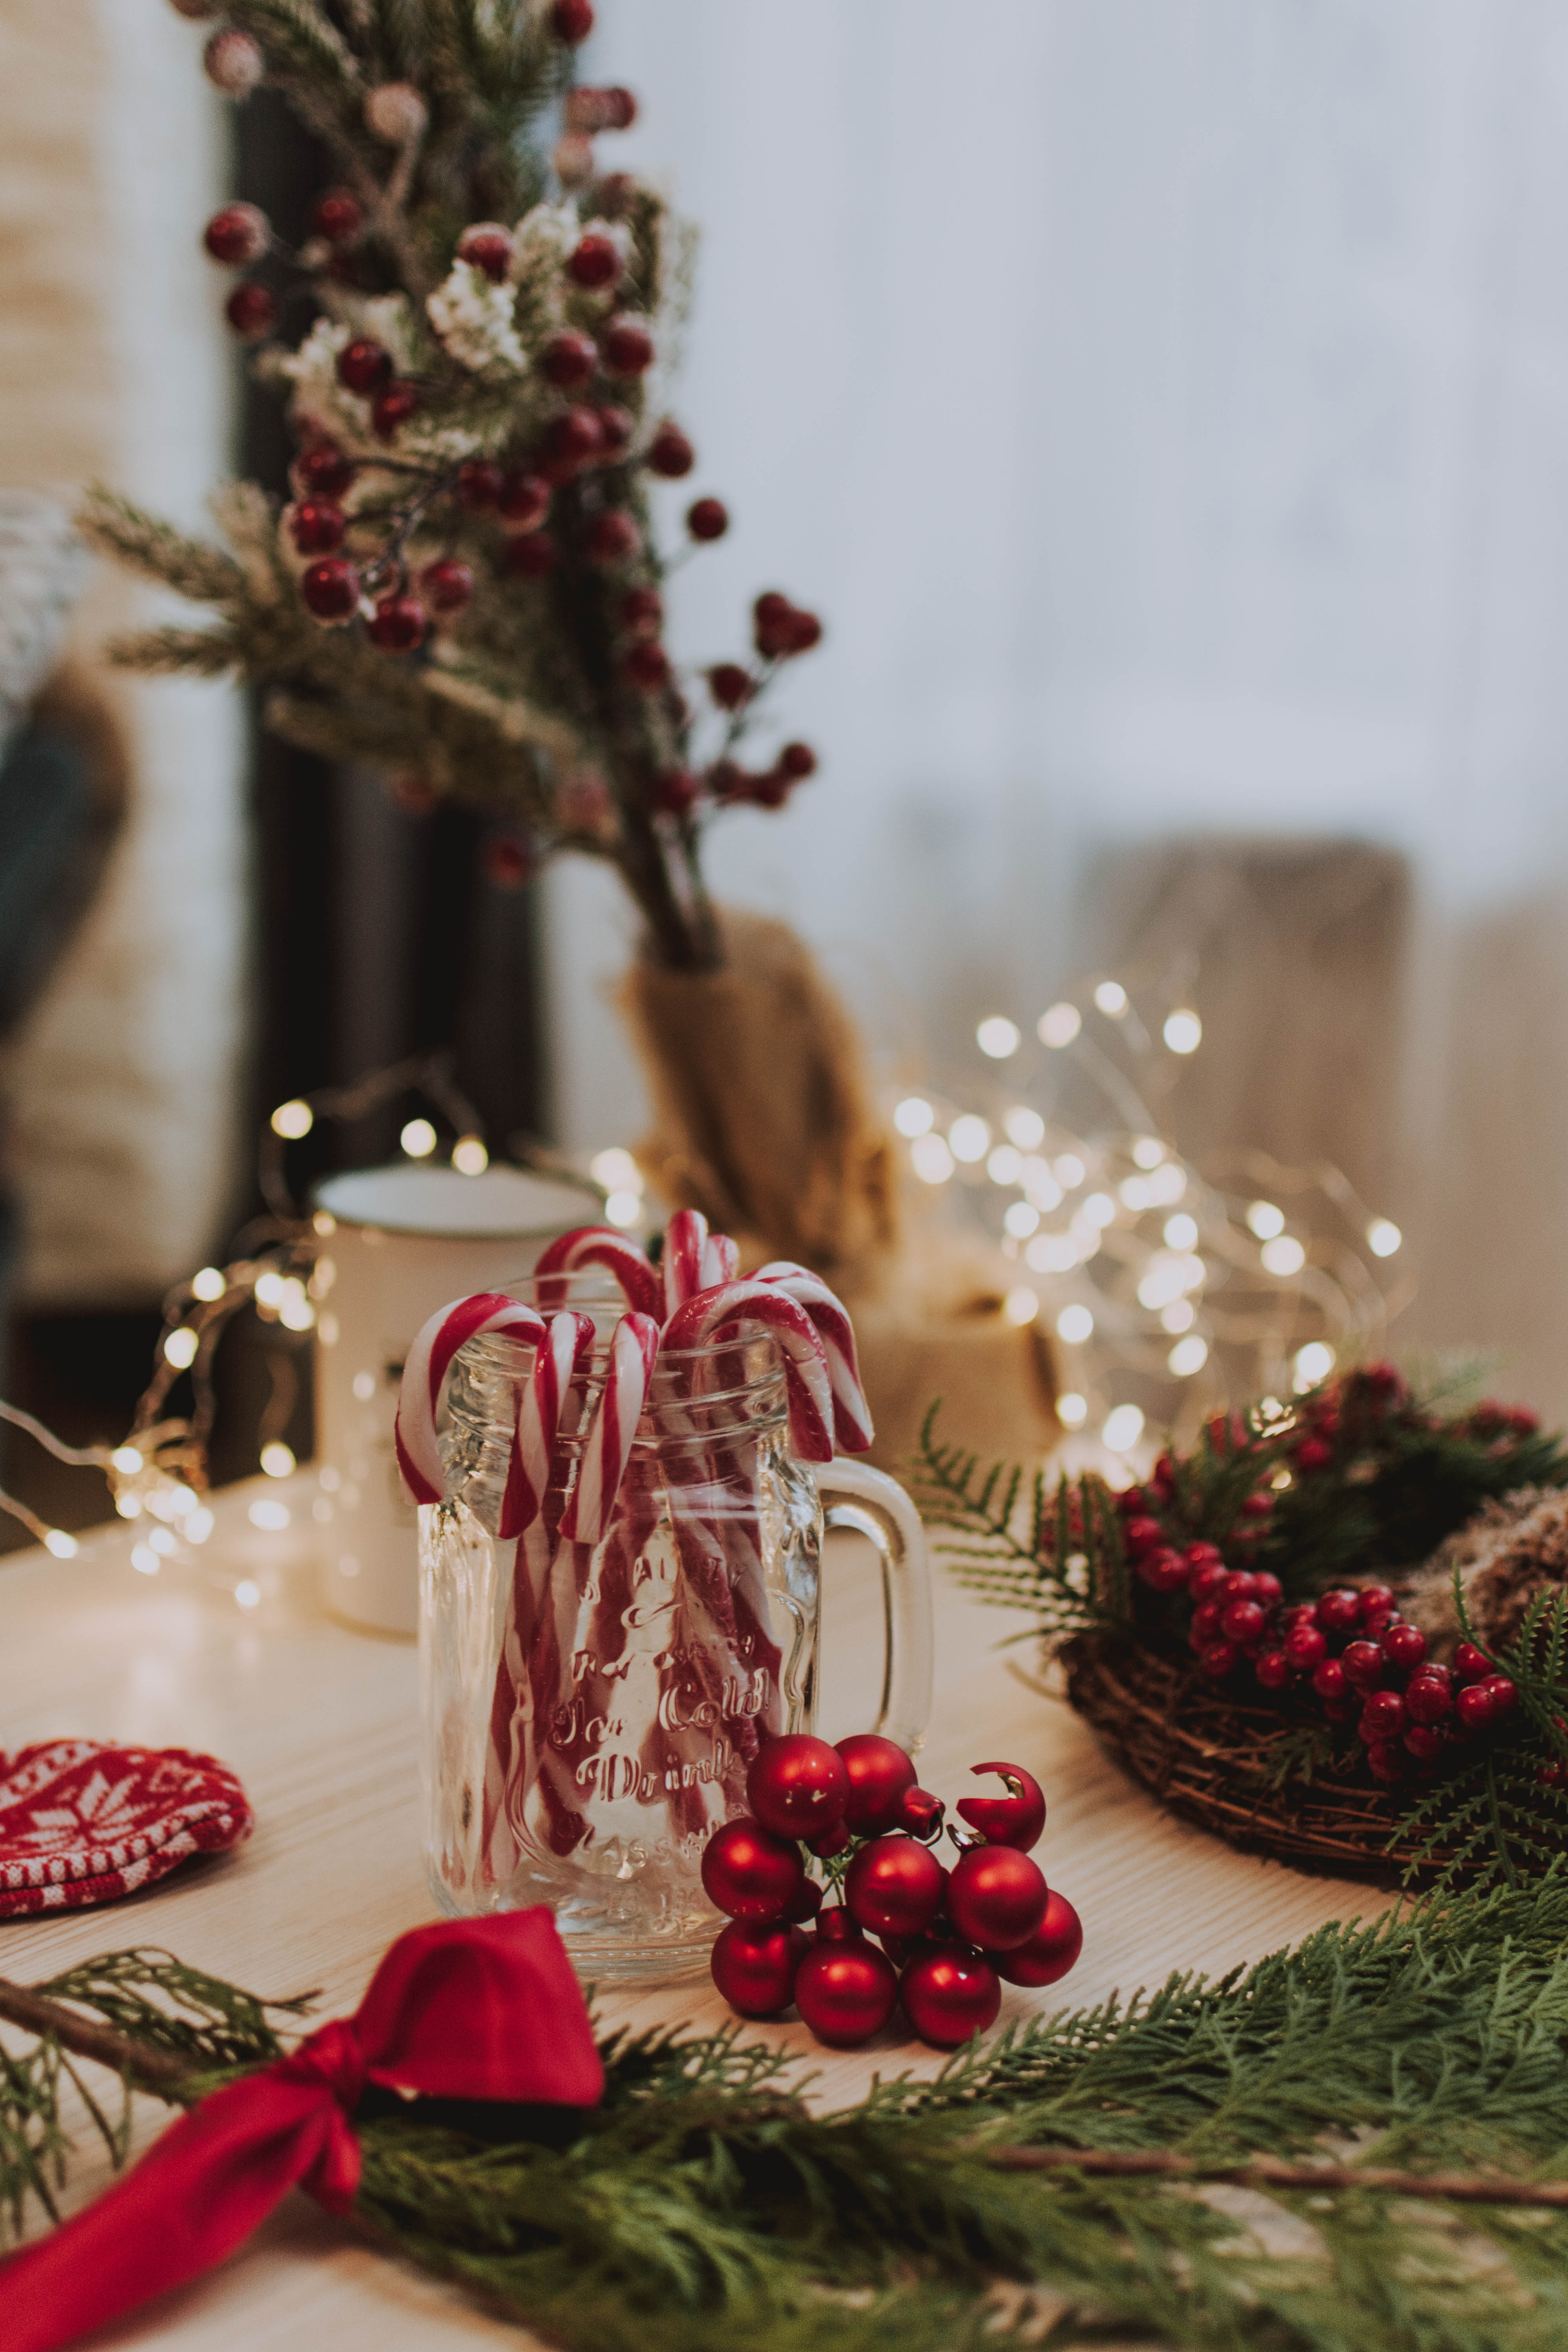 Deck the Halls: Transforming your rented space into a festive Christmas haven